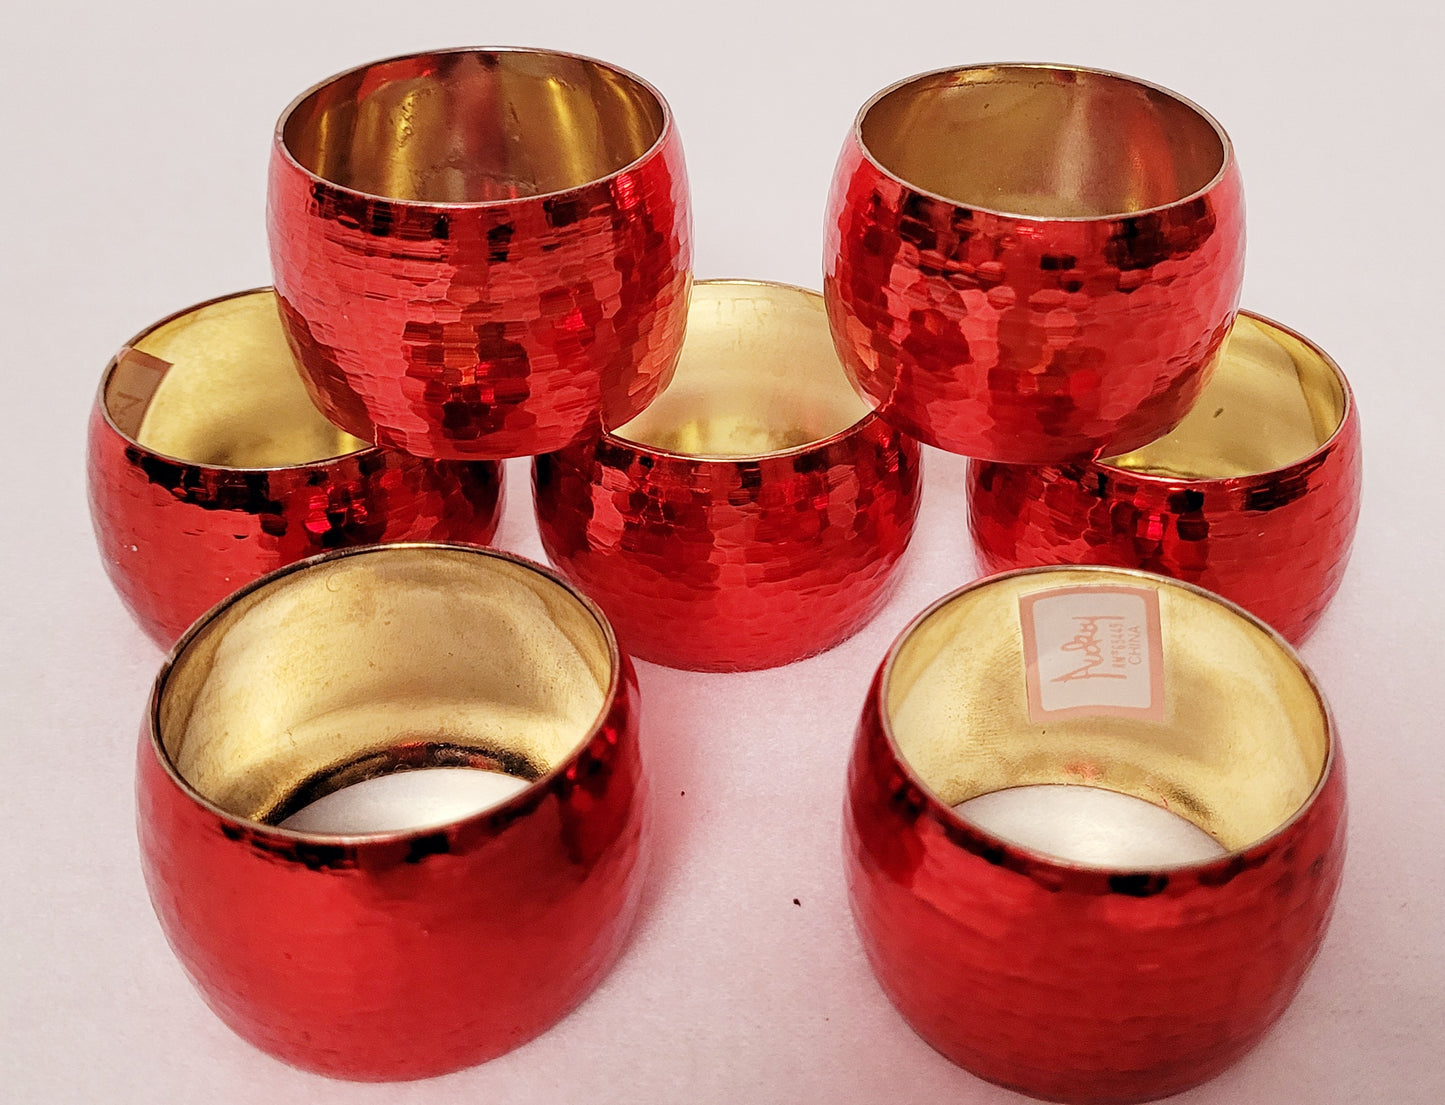 New - Hammered Seven (7) Red Silver Napkin Rings